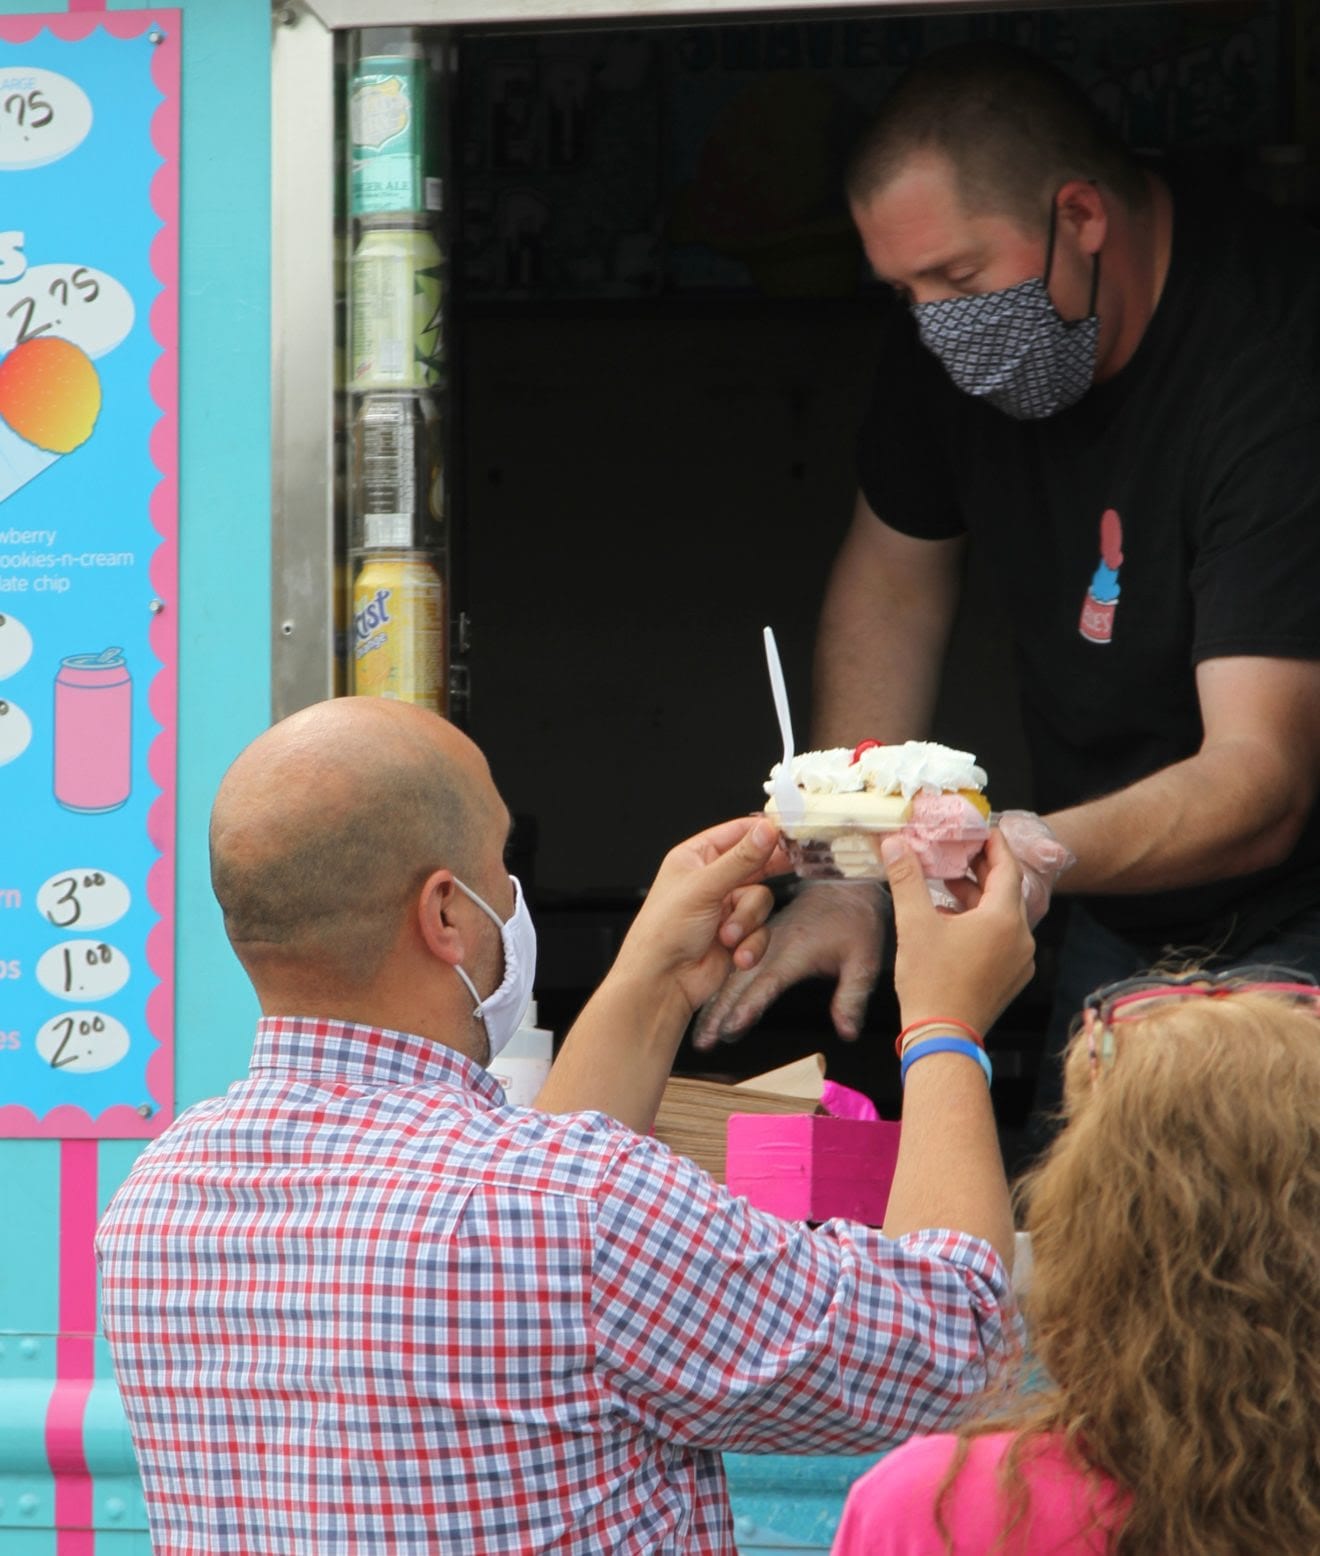 Town Administrator Gregory Enos picks up his ice cream at the window. (Photo courtesy Town of Avon)